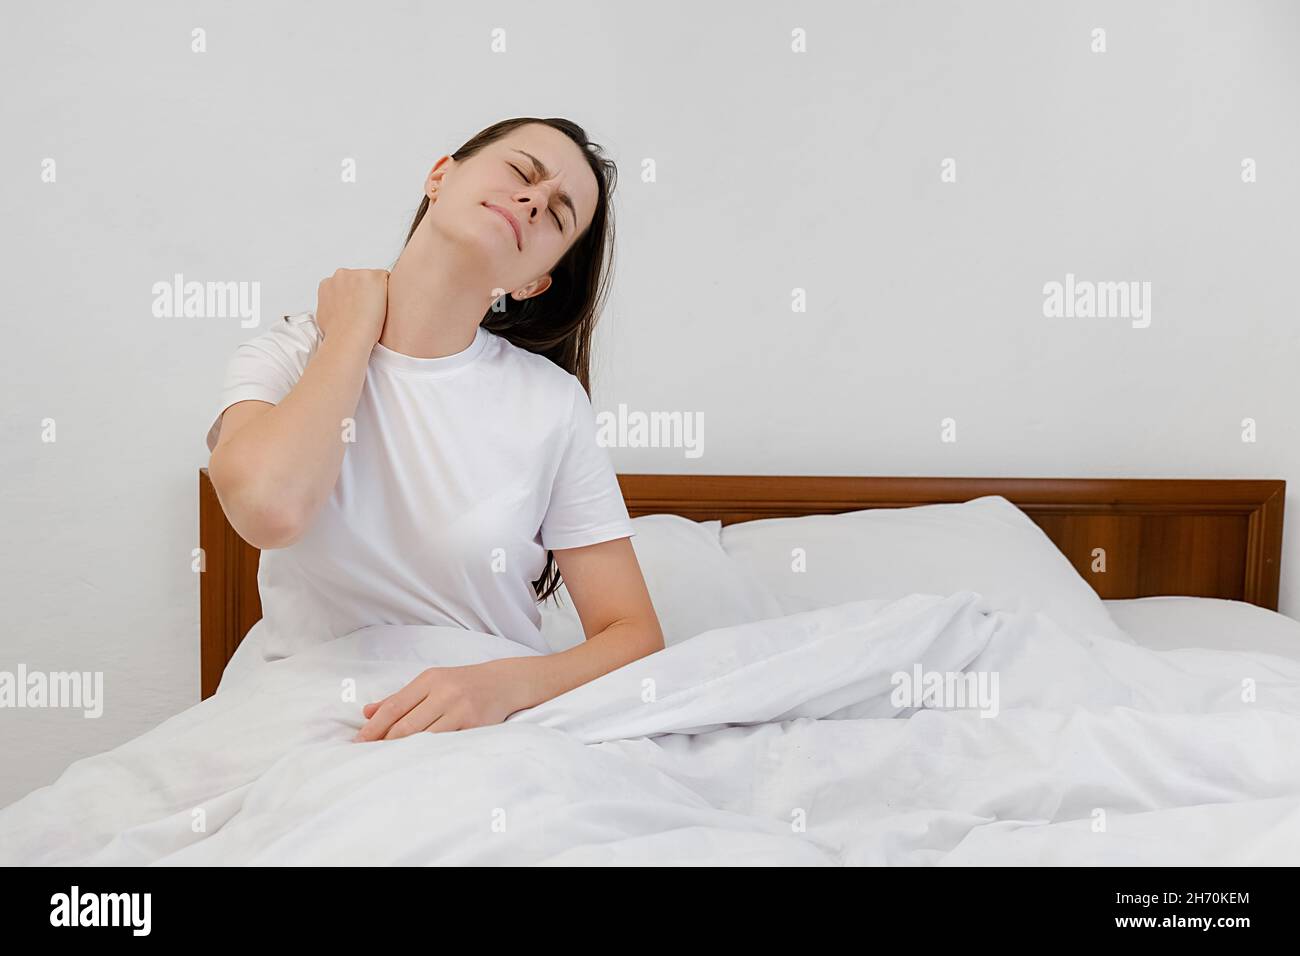 Fibromyalgia and backache concept. Unhappy young girl waking up in uncomfortable bed feeling ache in back pain massaging tensed muscles of stiff neck Stock Photo